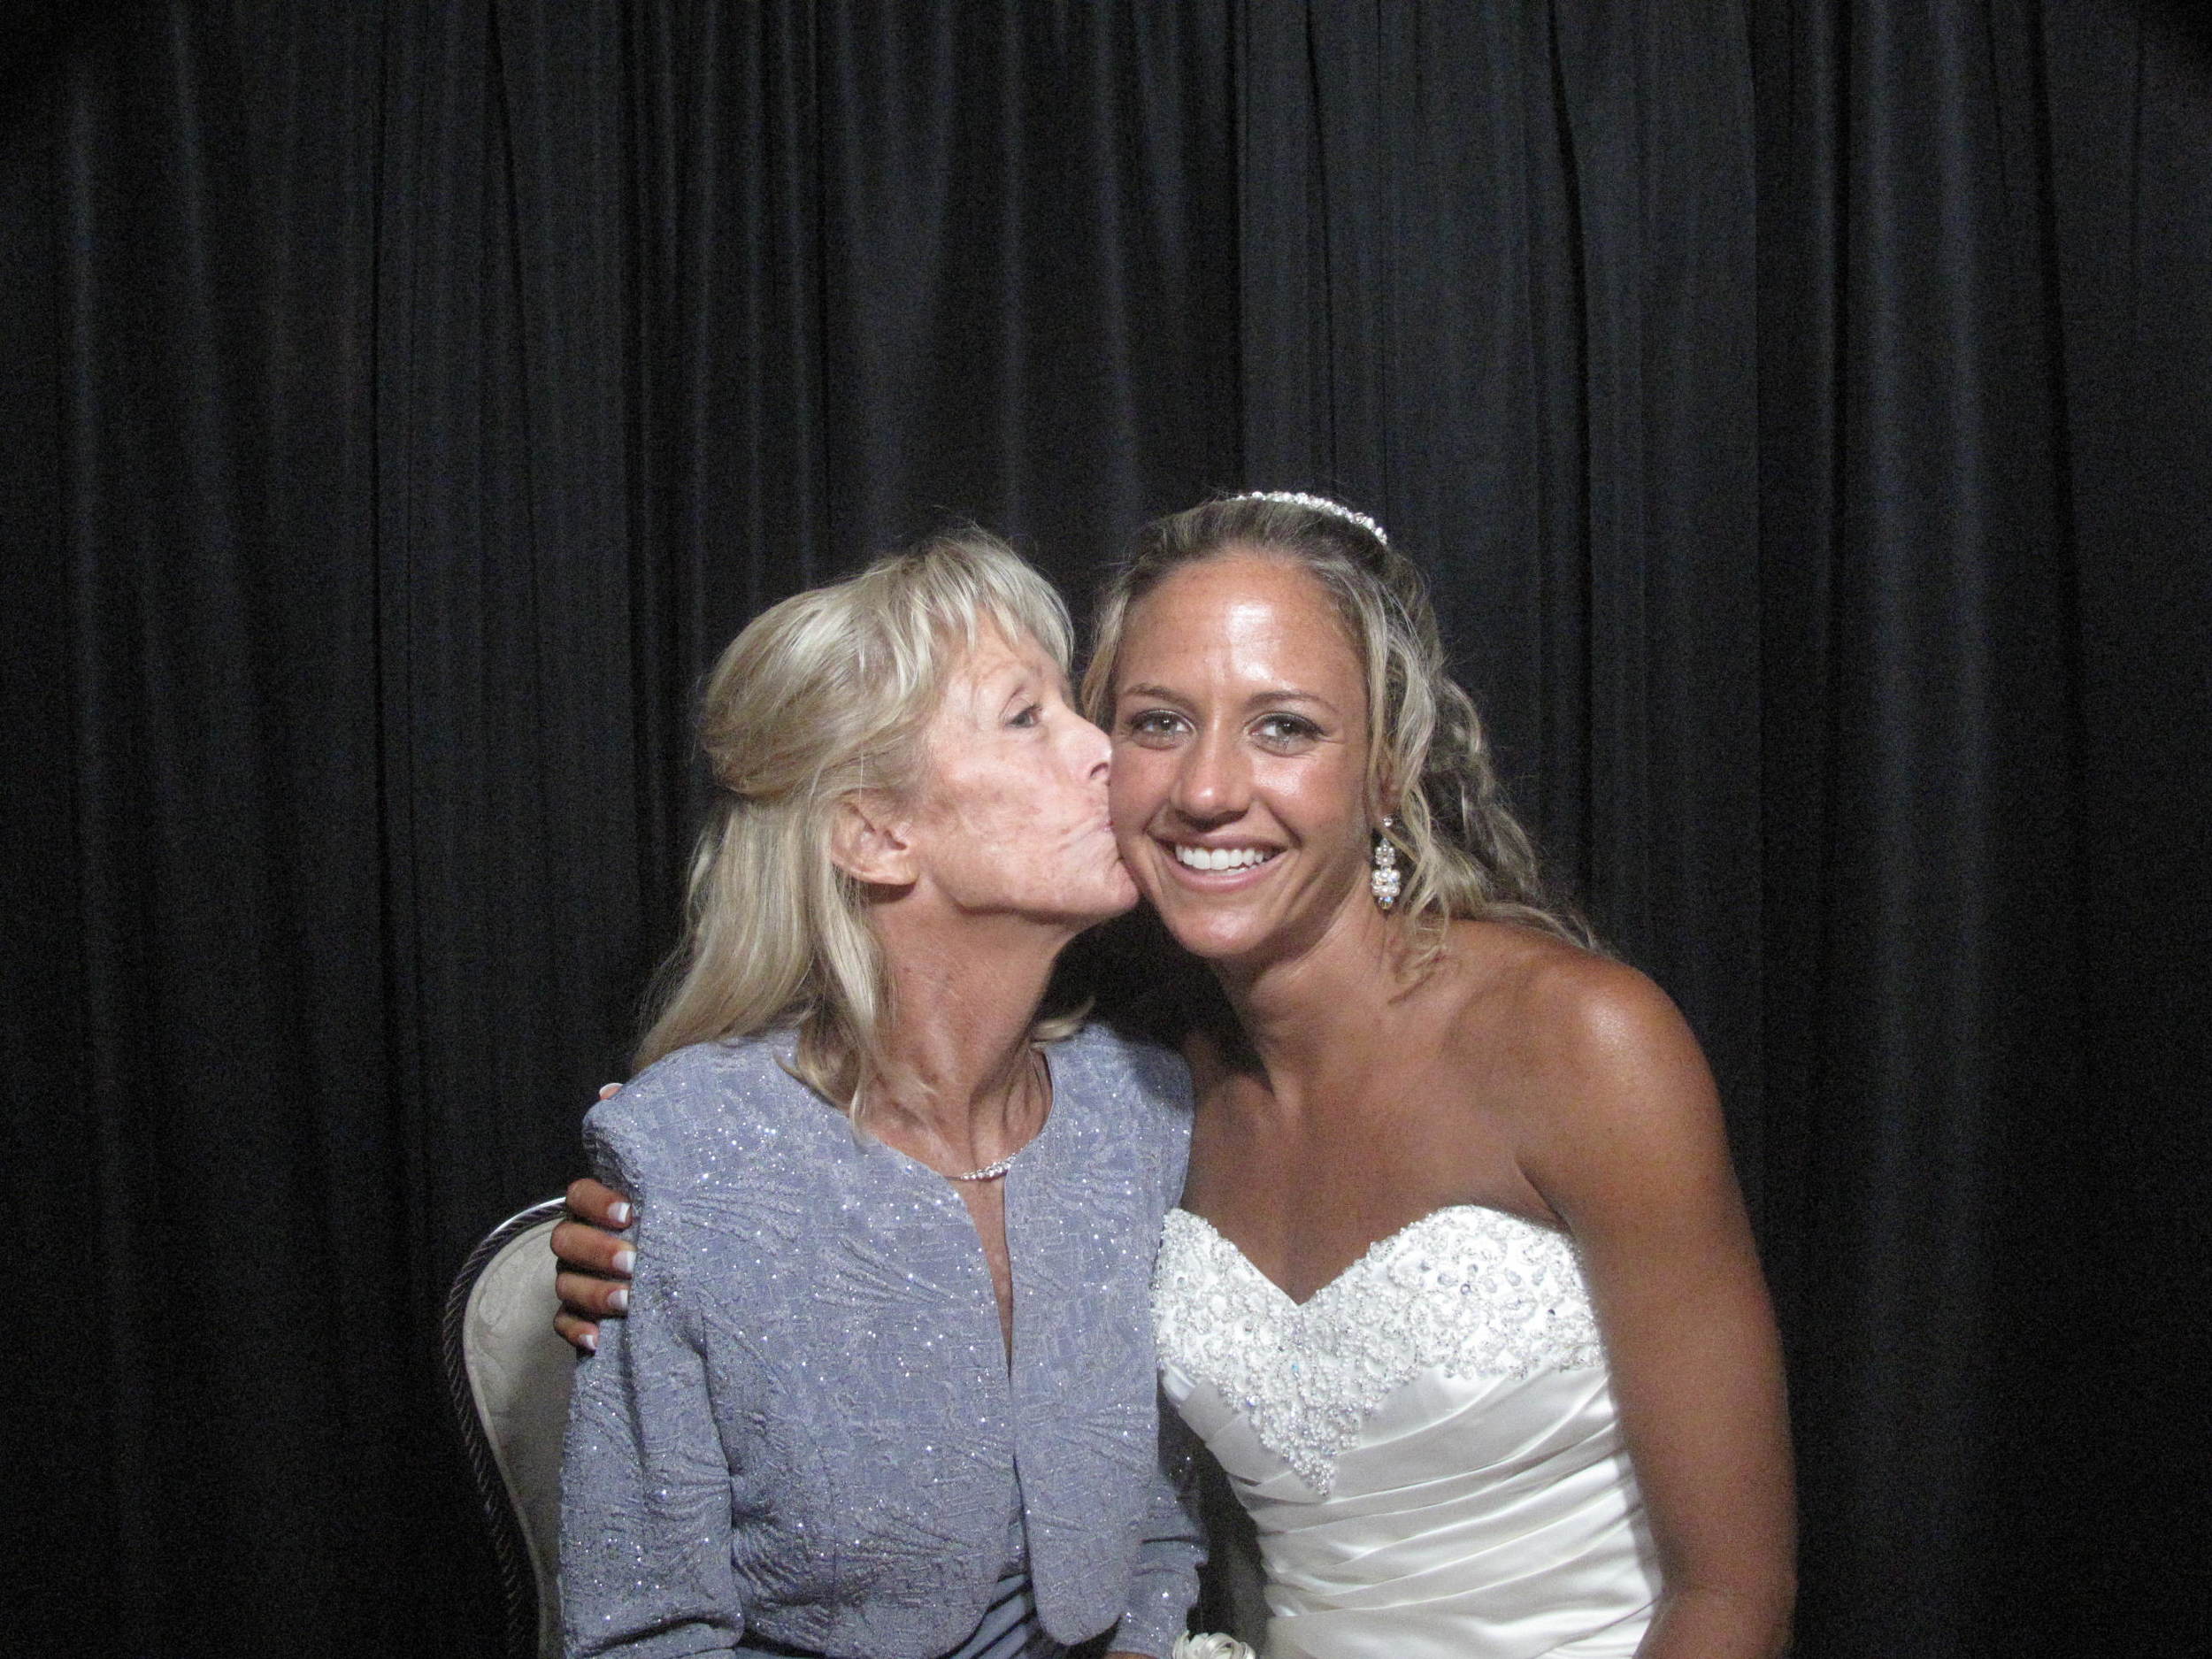 Snapshot Photobooths at Crystal Point Yacht Club in Point Pleasant, New Jersey